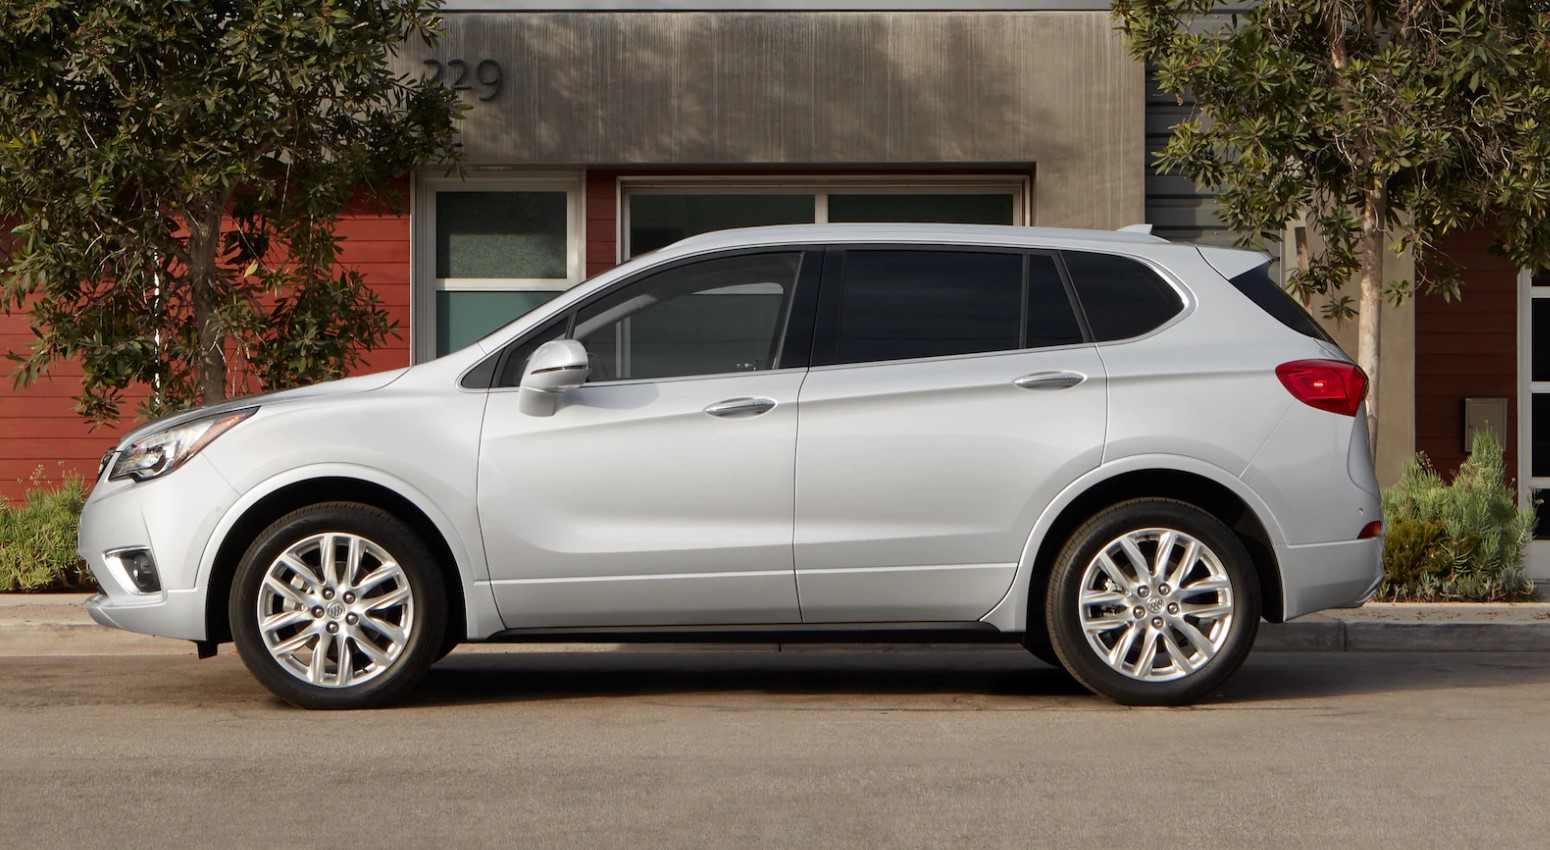 2019 Buick Envision Silver Exterior Side Profile Picture